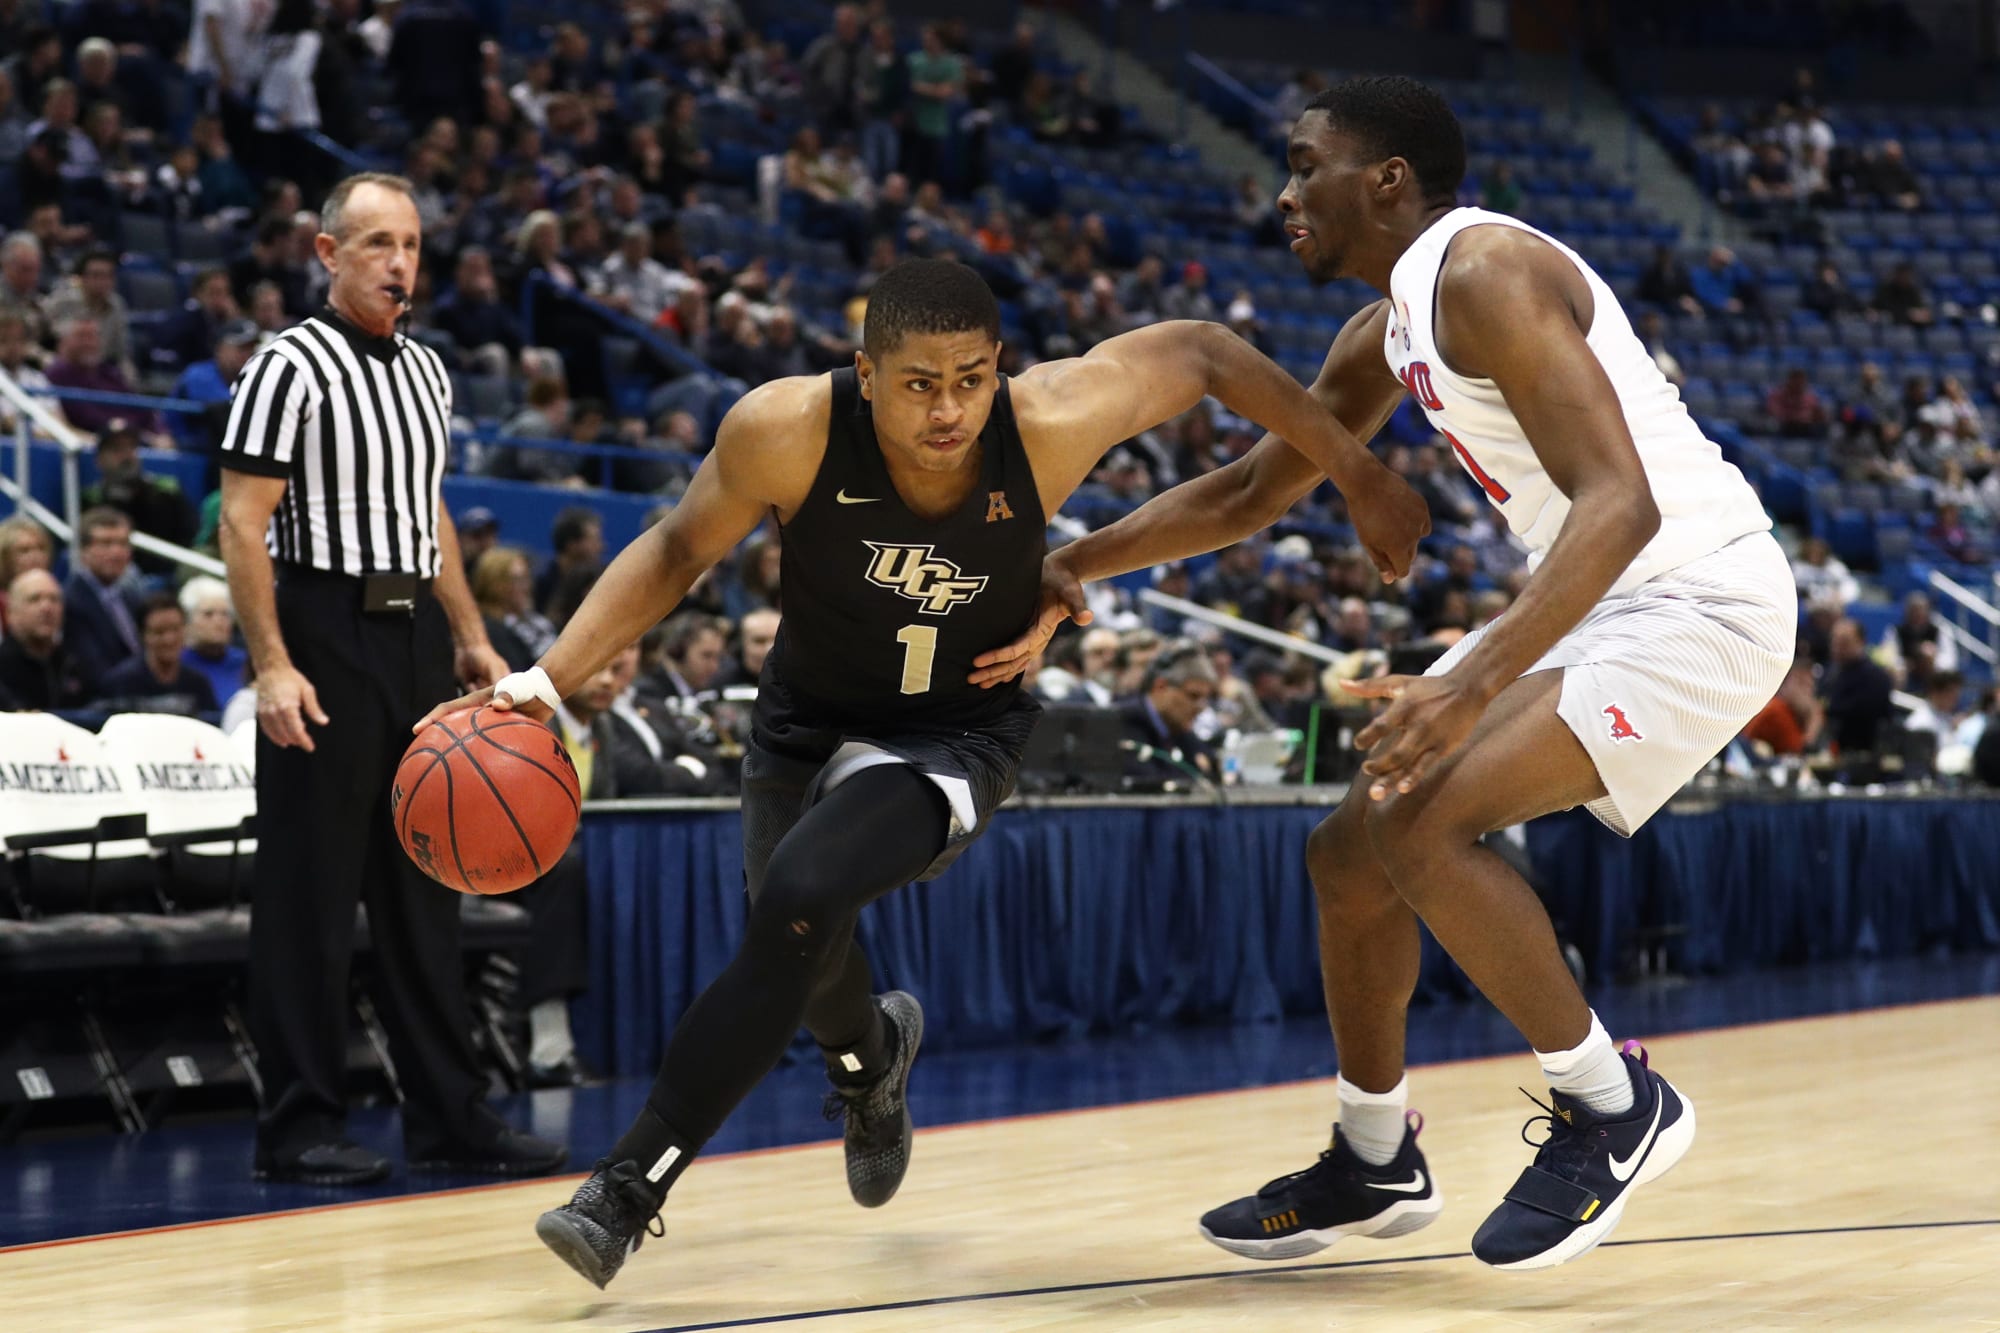 UCF Basketball: 2018-19 season preview for the Knights